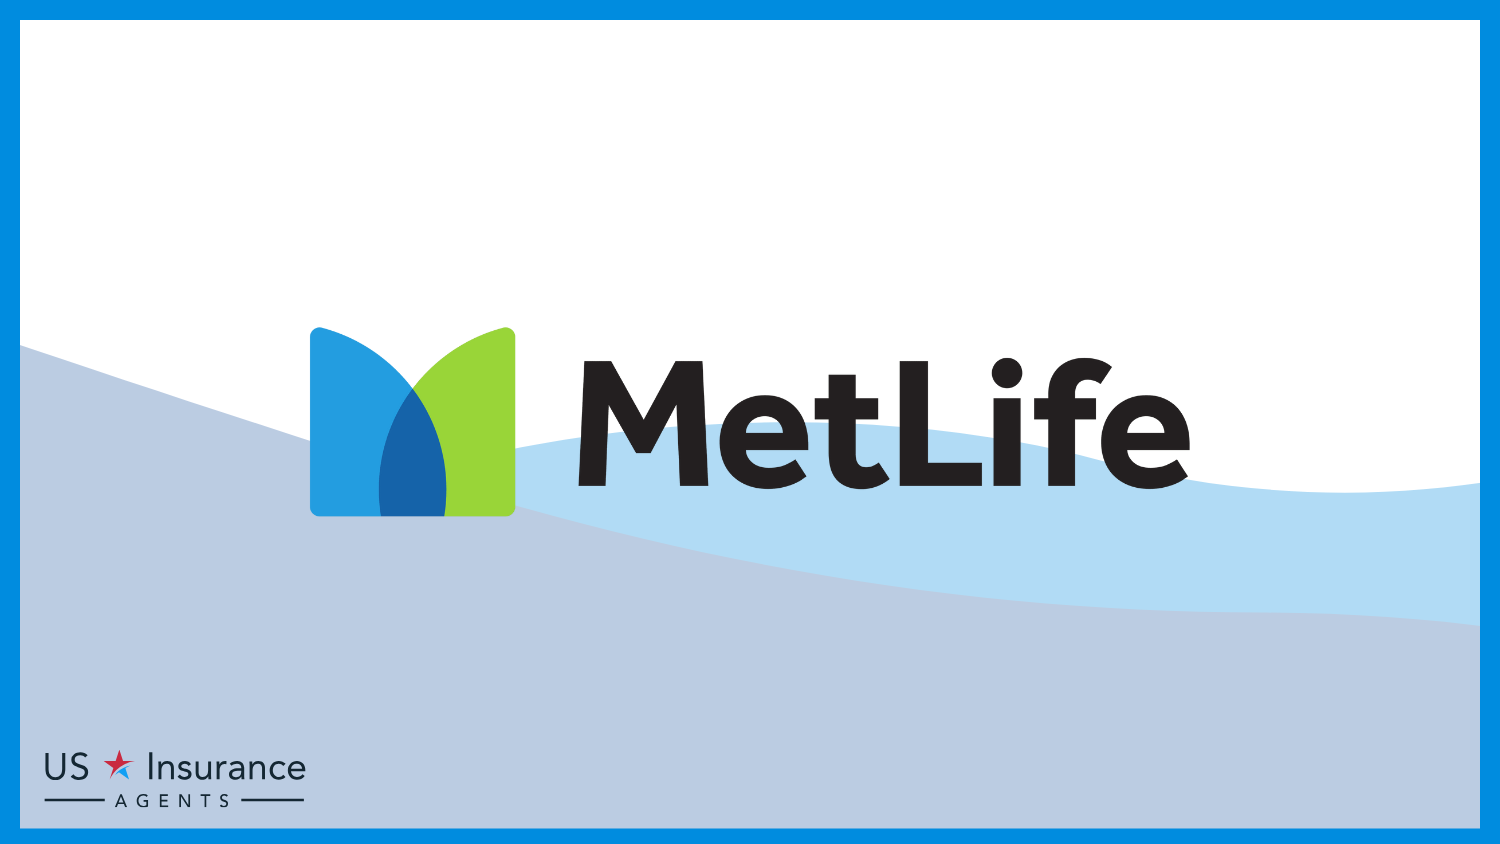 MetLife: Best Life Insurance for a Child’s Father